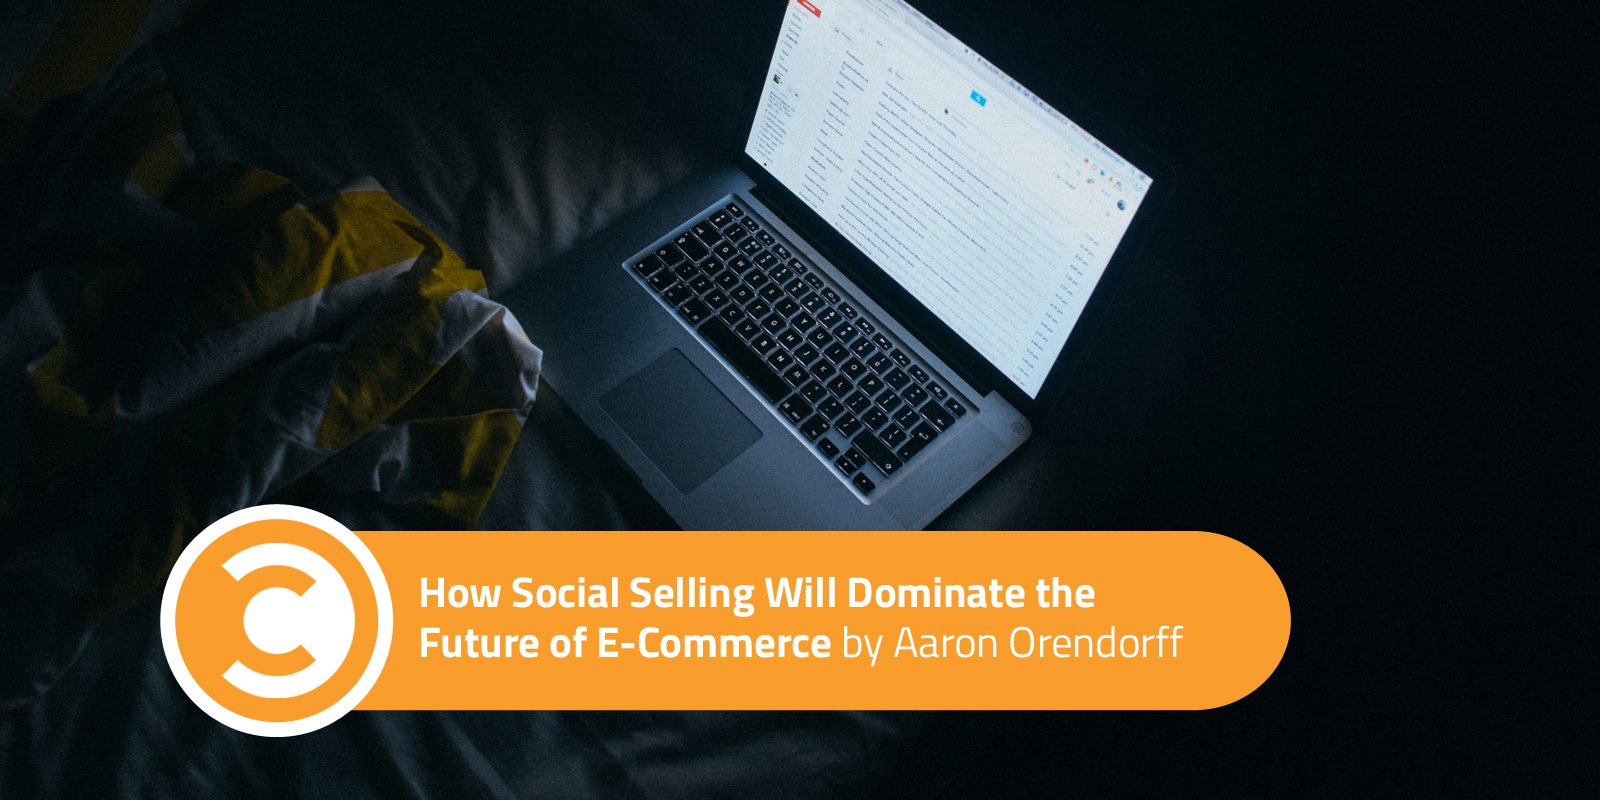 How Social Selling Will Dominate the Future of E-Commerce